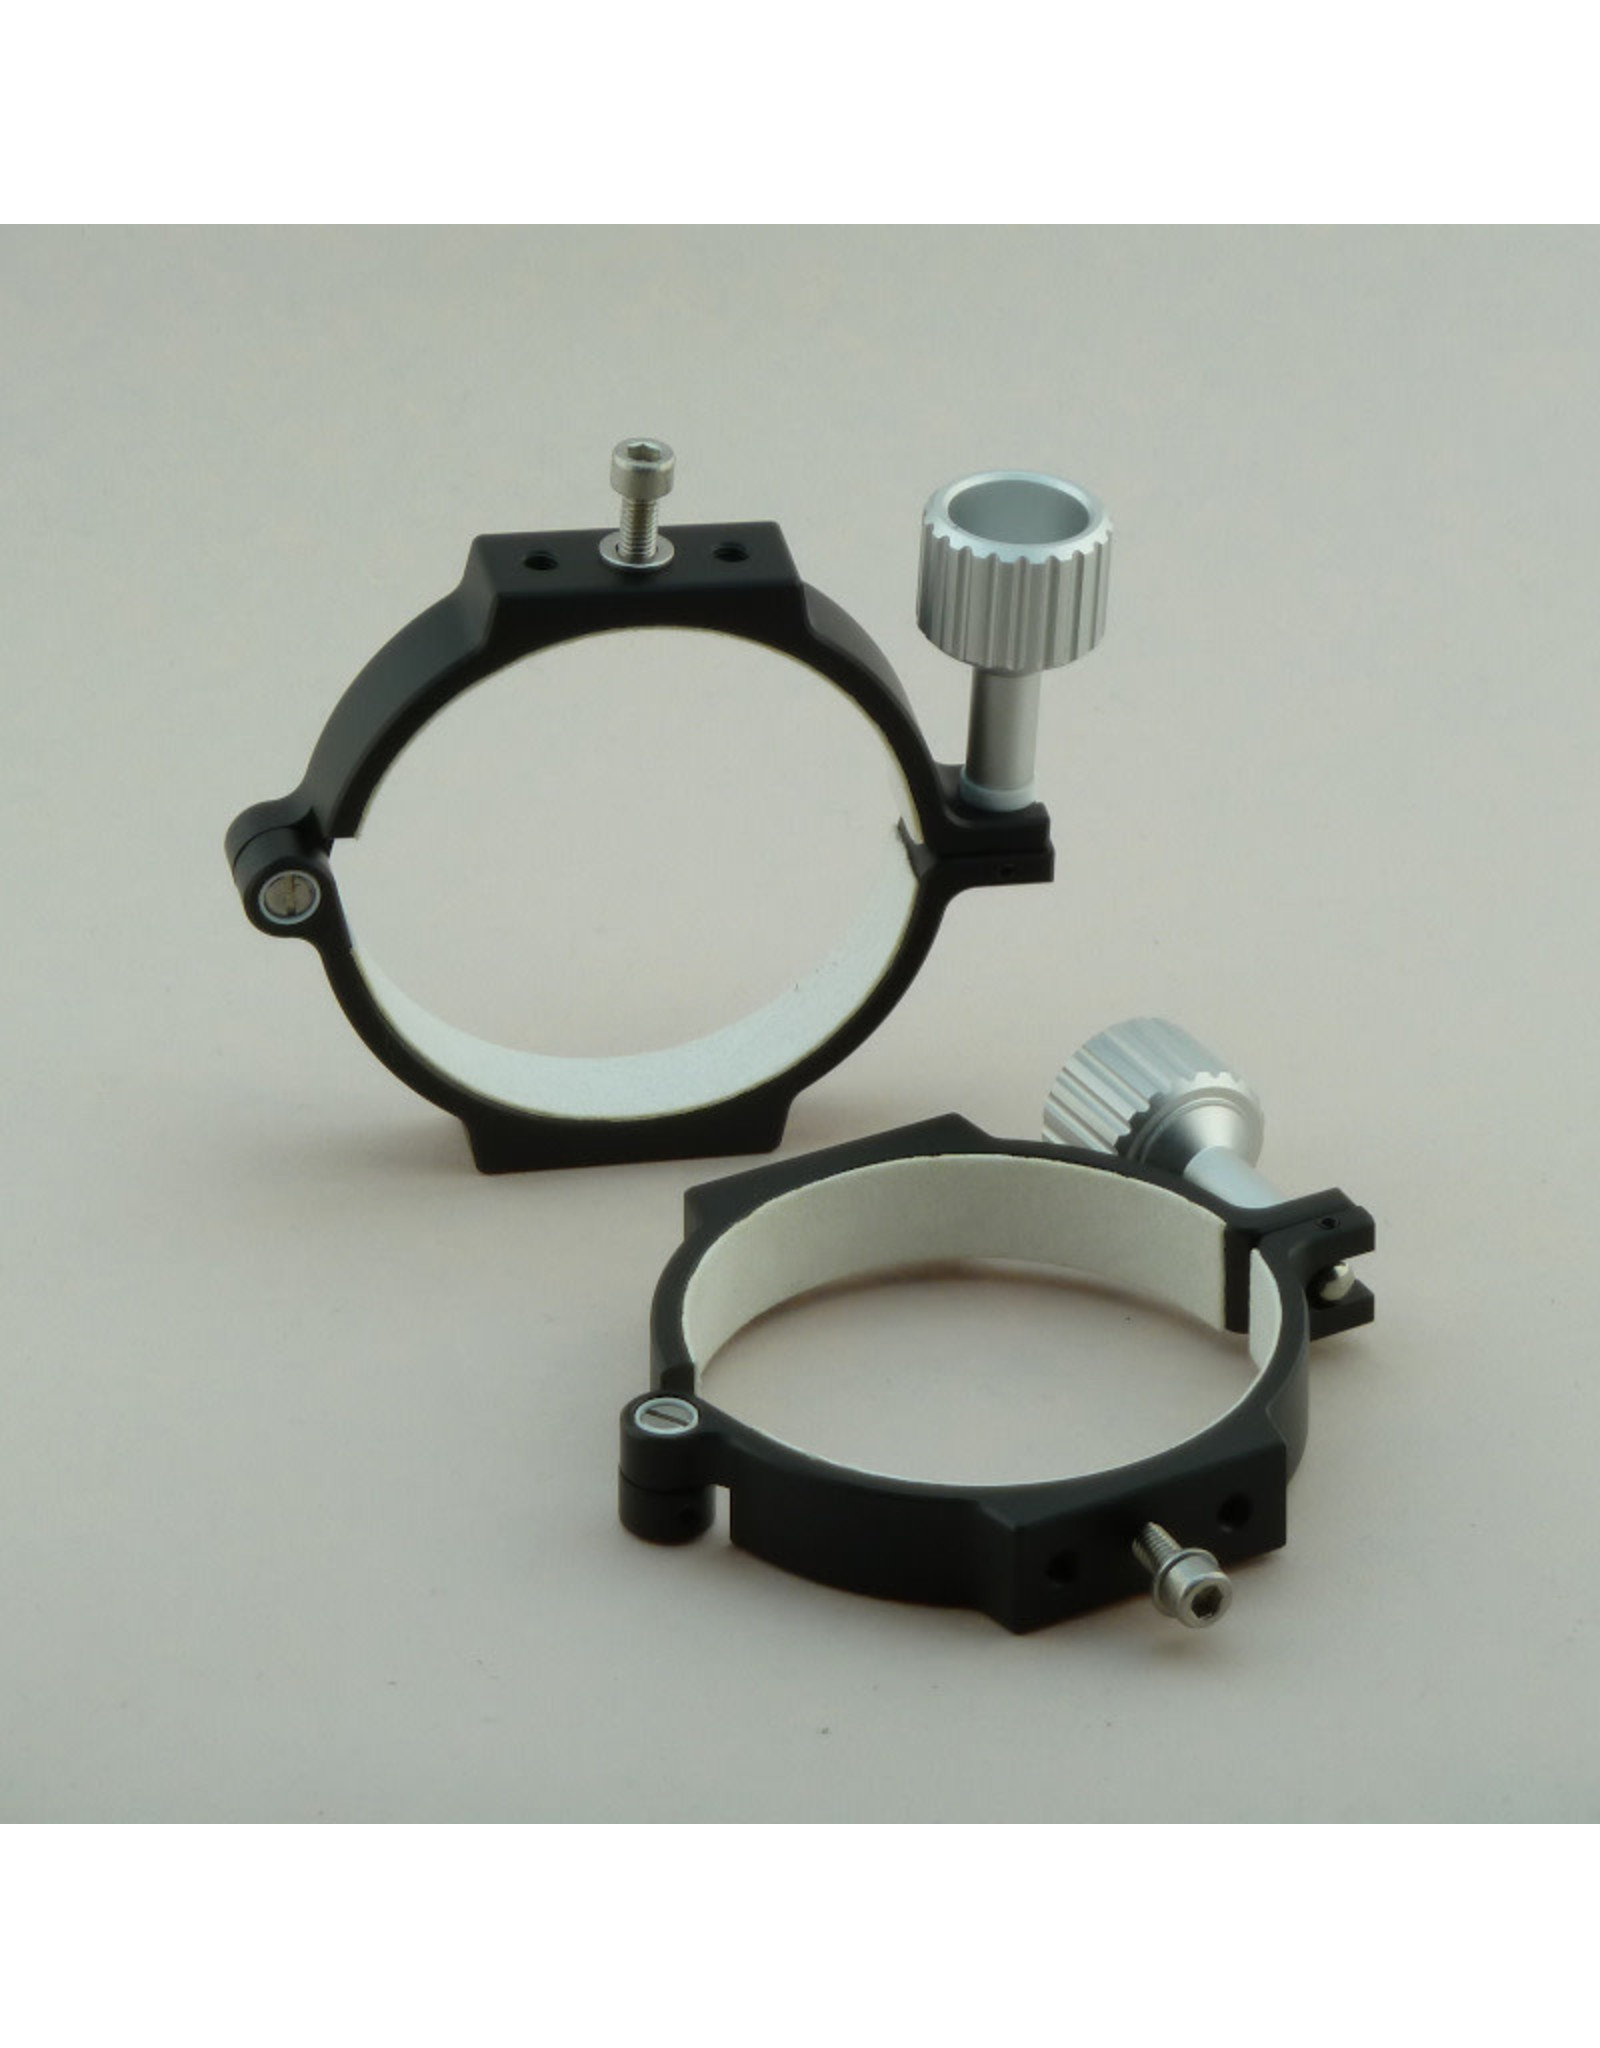 Verwaand Keuze Verstikkend Antares Telescope Tube Mounting Rings - 3.5" (90mm) (Set of 2) for many  80mm Refractors (Same as Orion) - Camera Concepts & Telescope Solutions